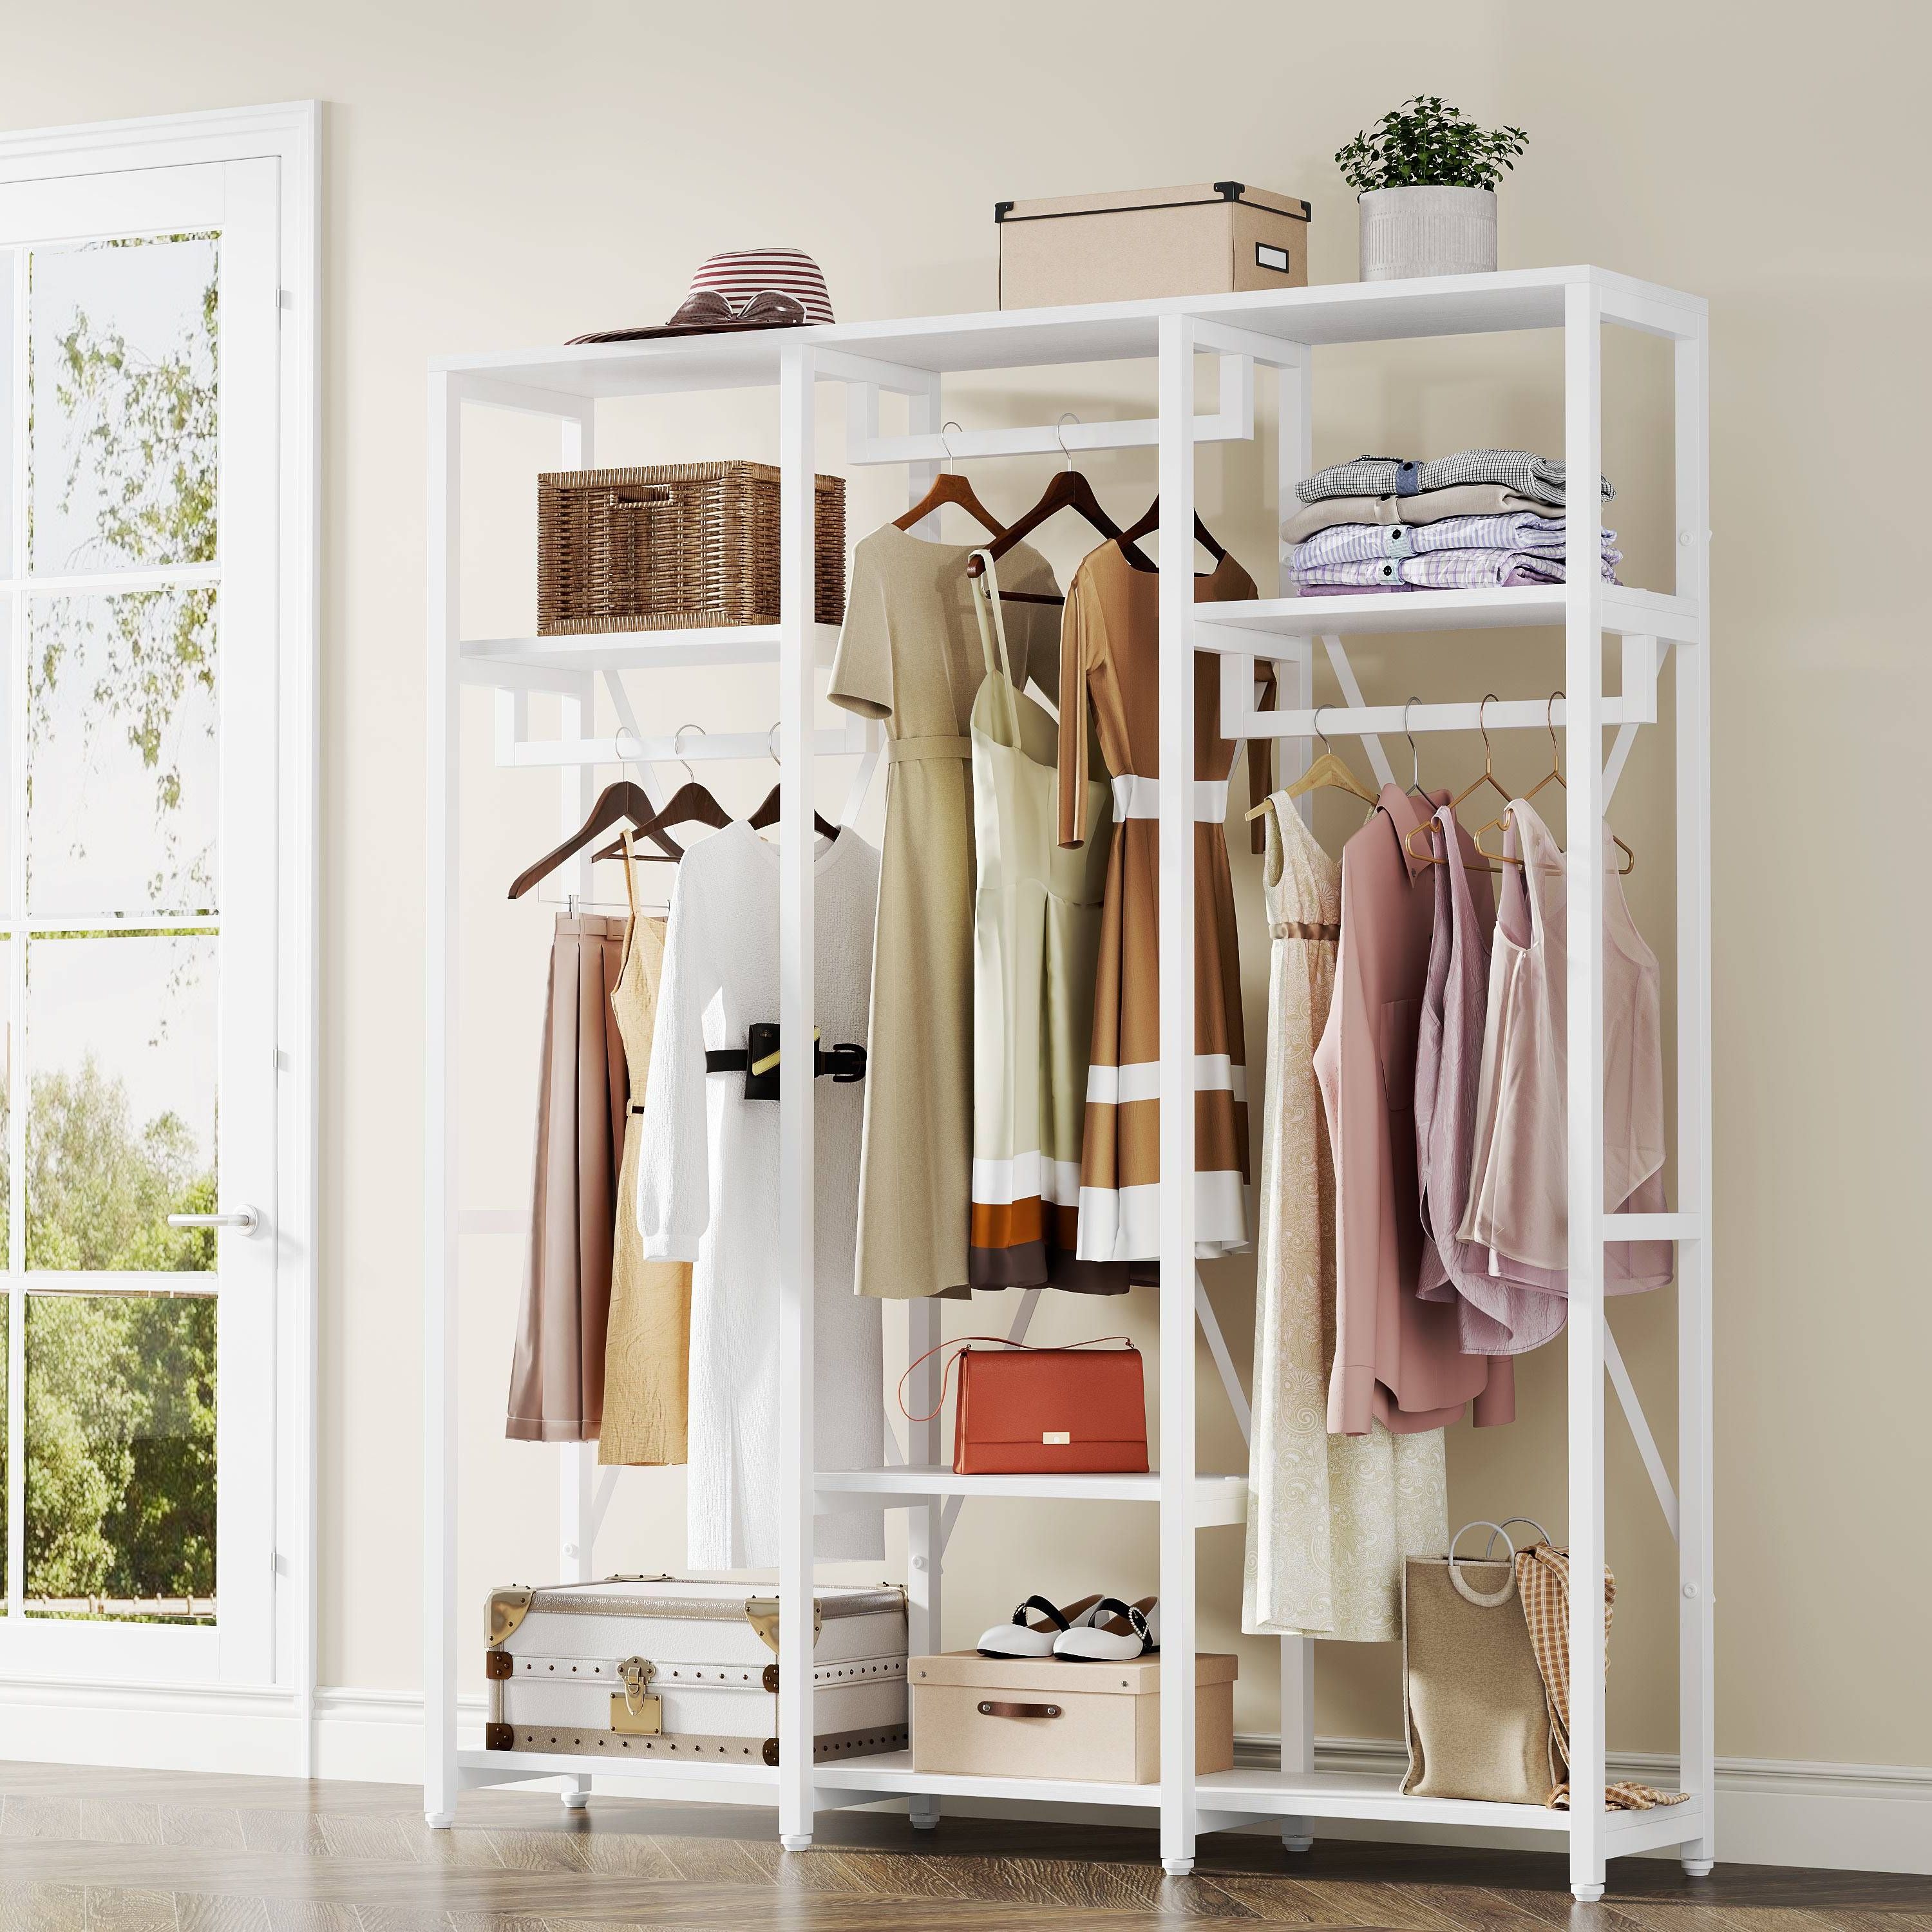 Freestanding Closet Organizer, Industrial 3 Rod Garment Rackwhite In 2023 |  Free Standing Closet, Closet Organization, Garment Racks With Regard To Wardrobes With 3 Hanging Rod (Gallery 16 of 20)